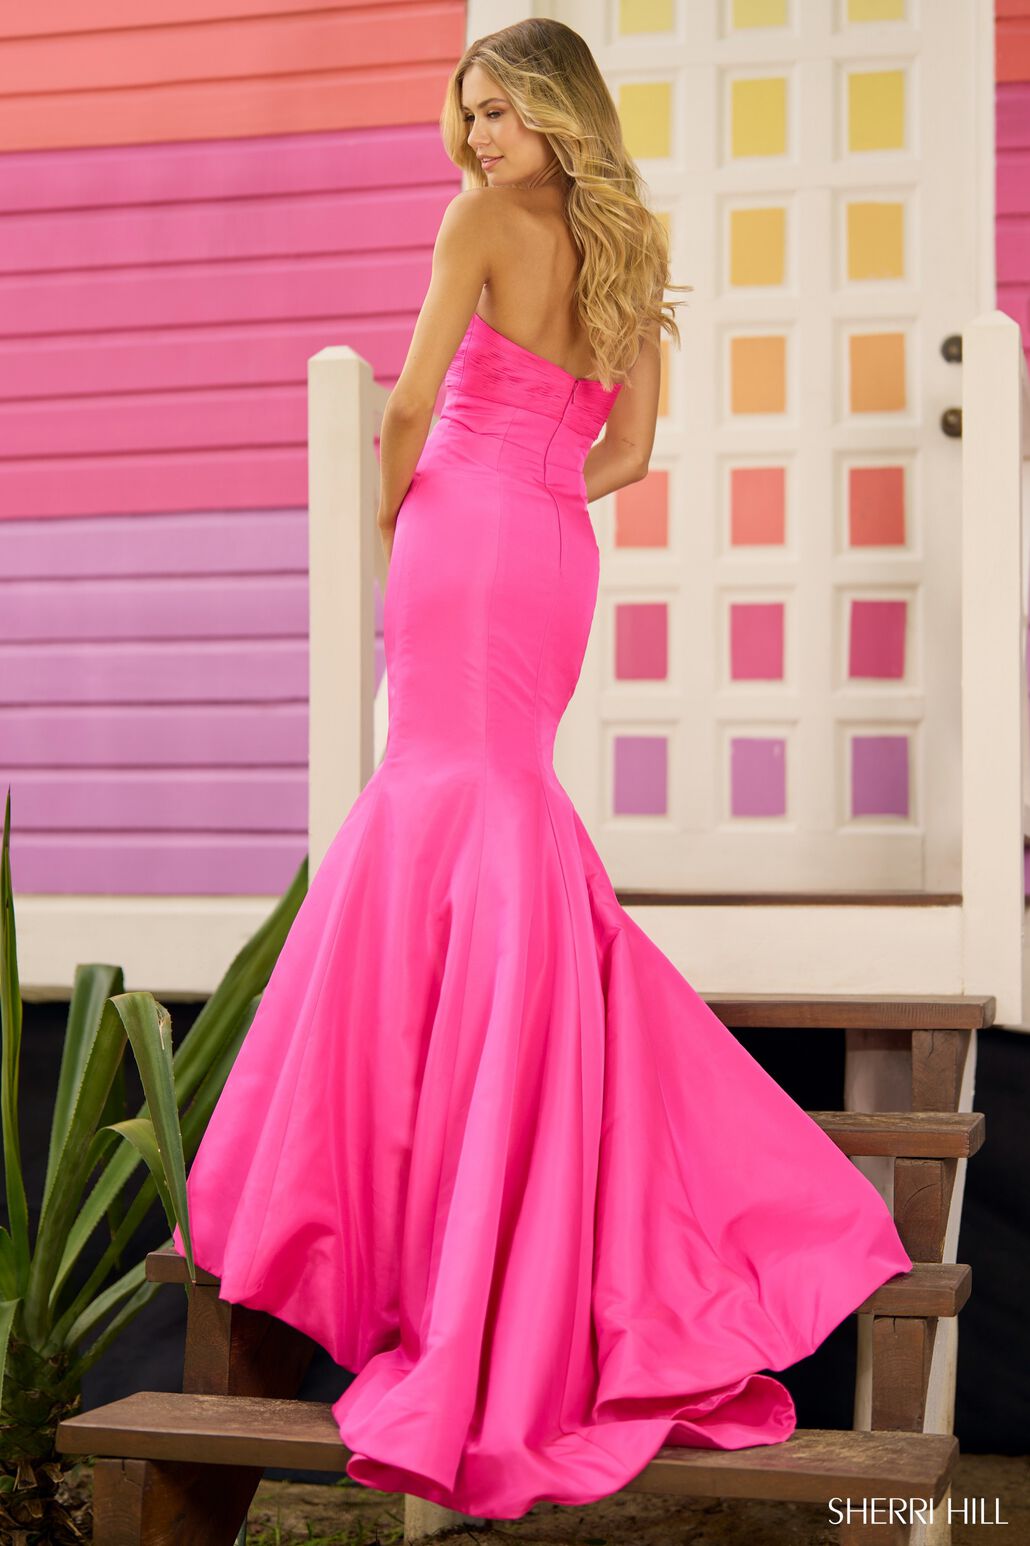 A mesmerizing strapless taffeta mermaid prom gown with a ruched neckline, keyhole, and intricate flower detail on the bodice. Perfect for prom or evening events.